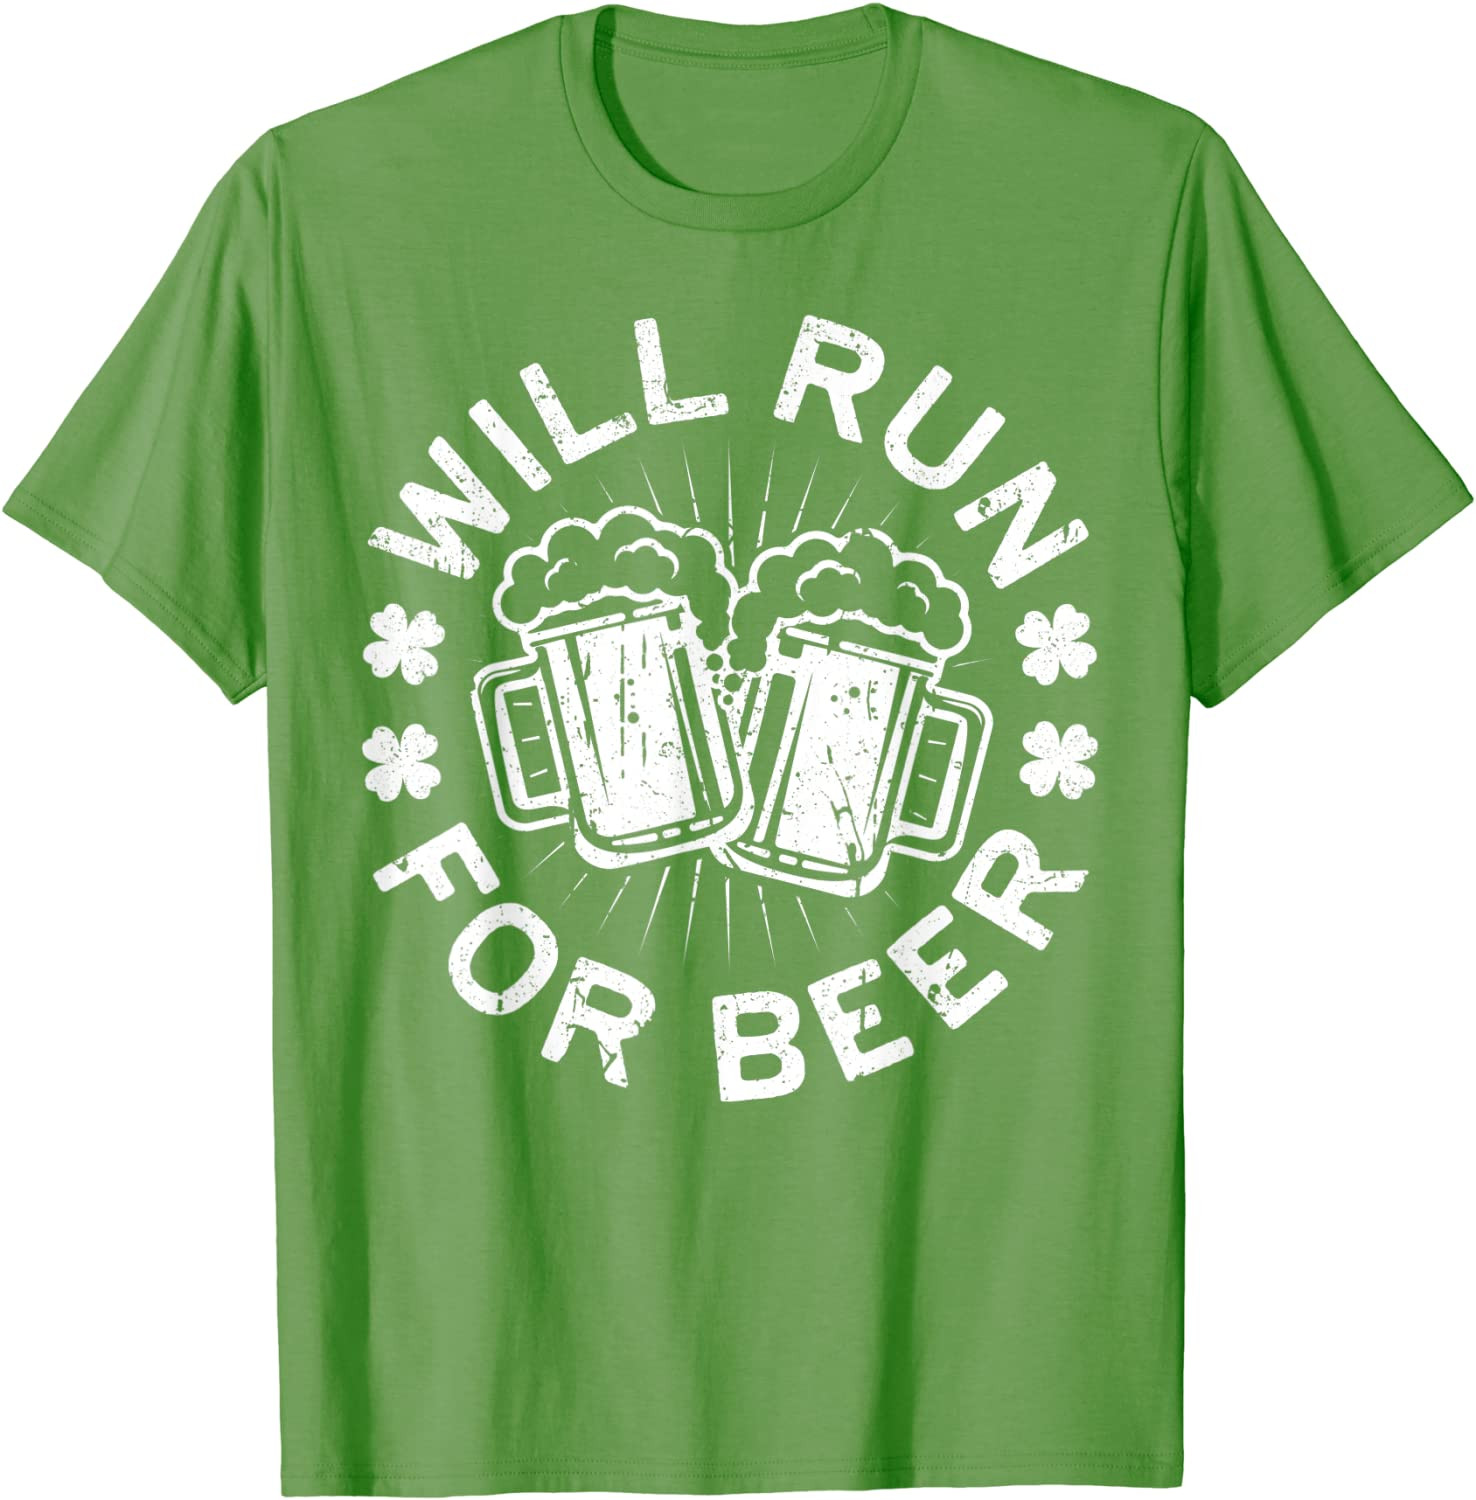 Will Run For Beer T-Shirt